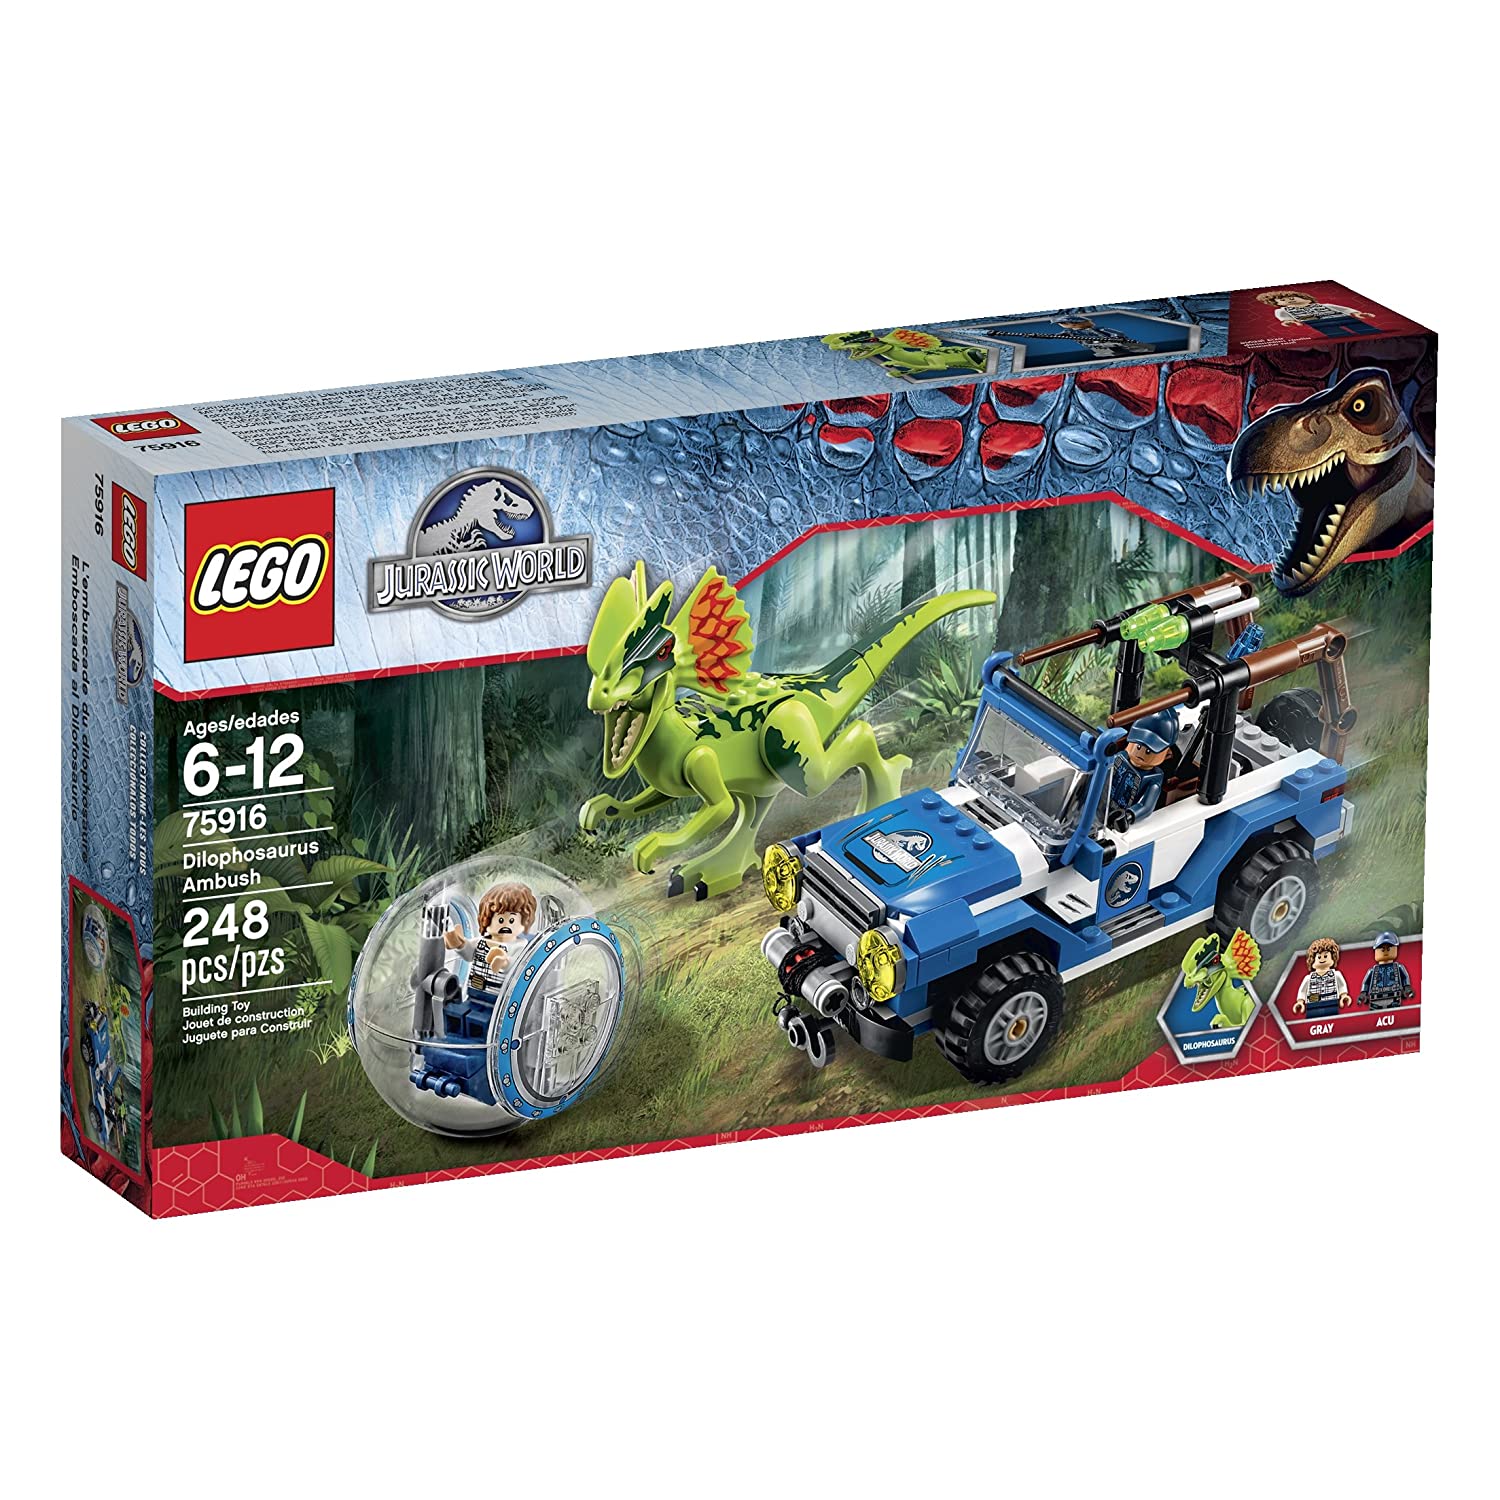 Top 8 Best Lego Dinosaurs Set Reviews in 2022 2